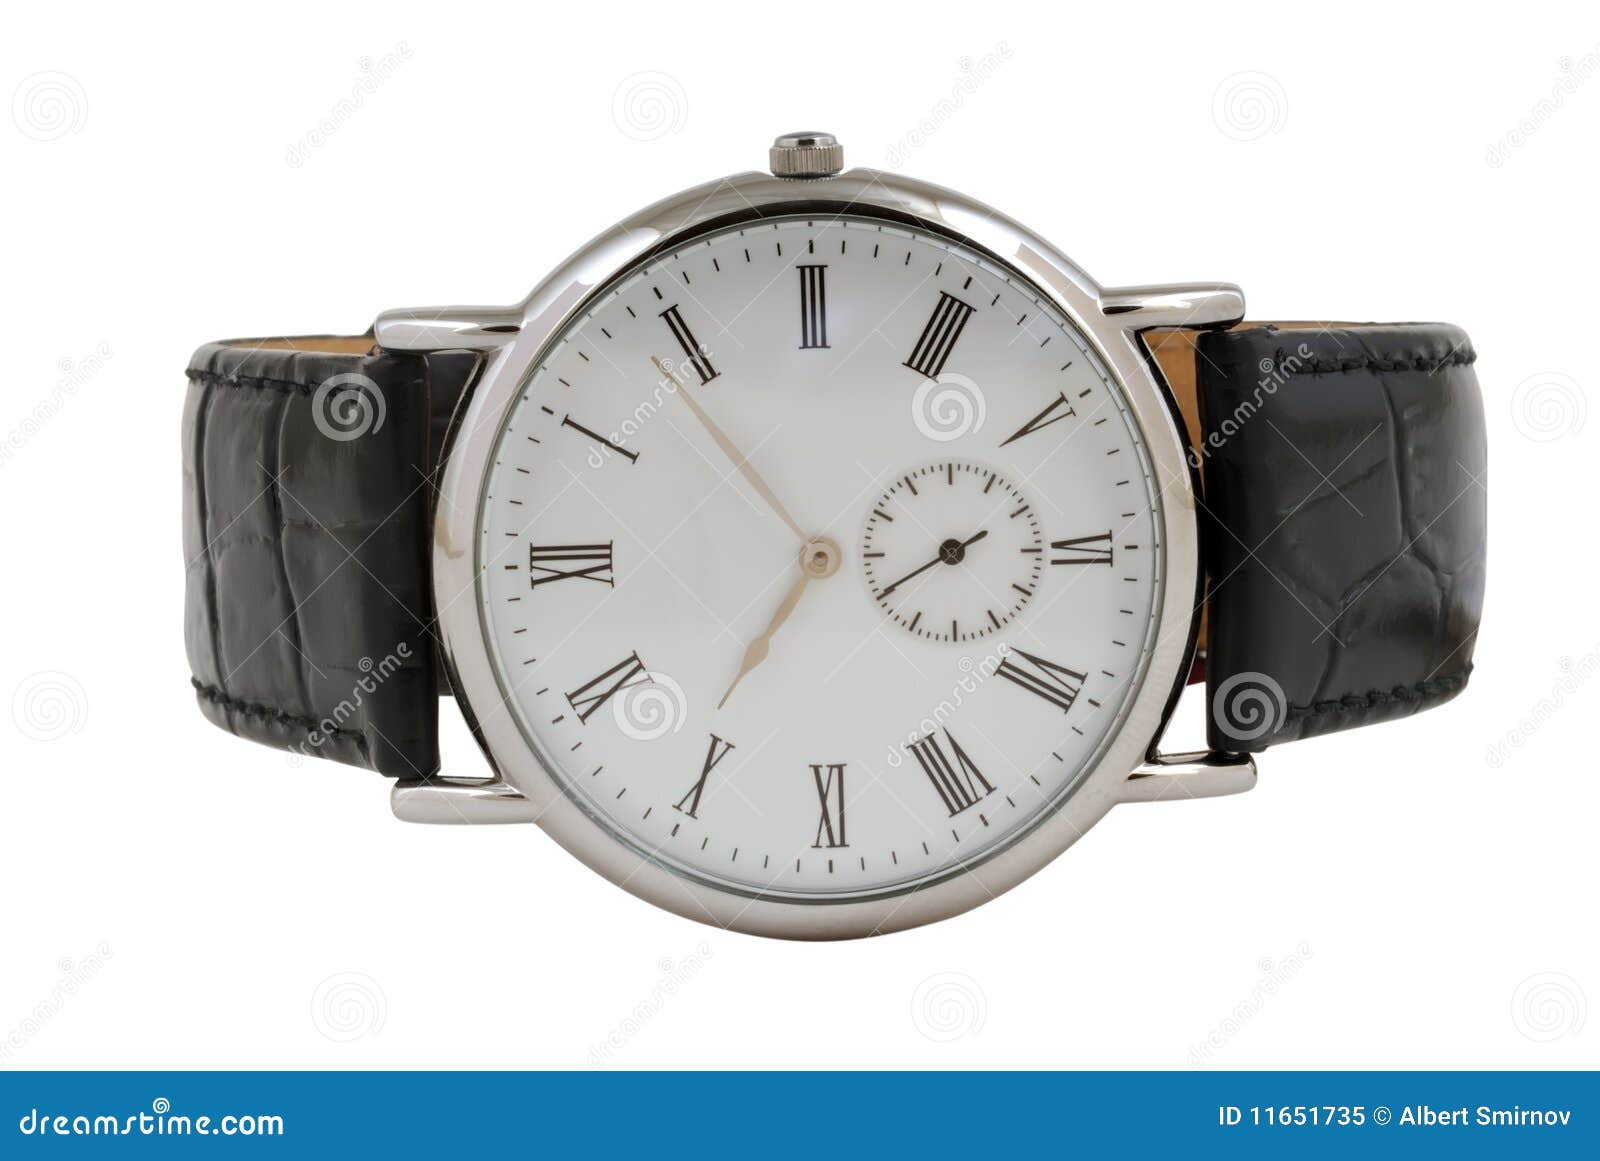 Man s watch stock image. Image of elegance, minute, silver - 11651735